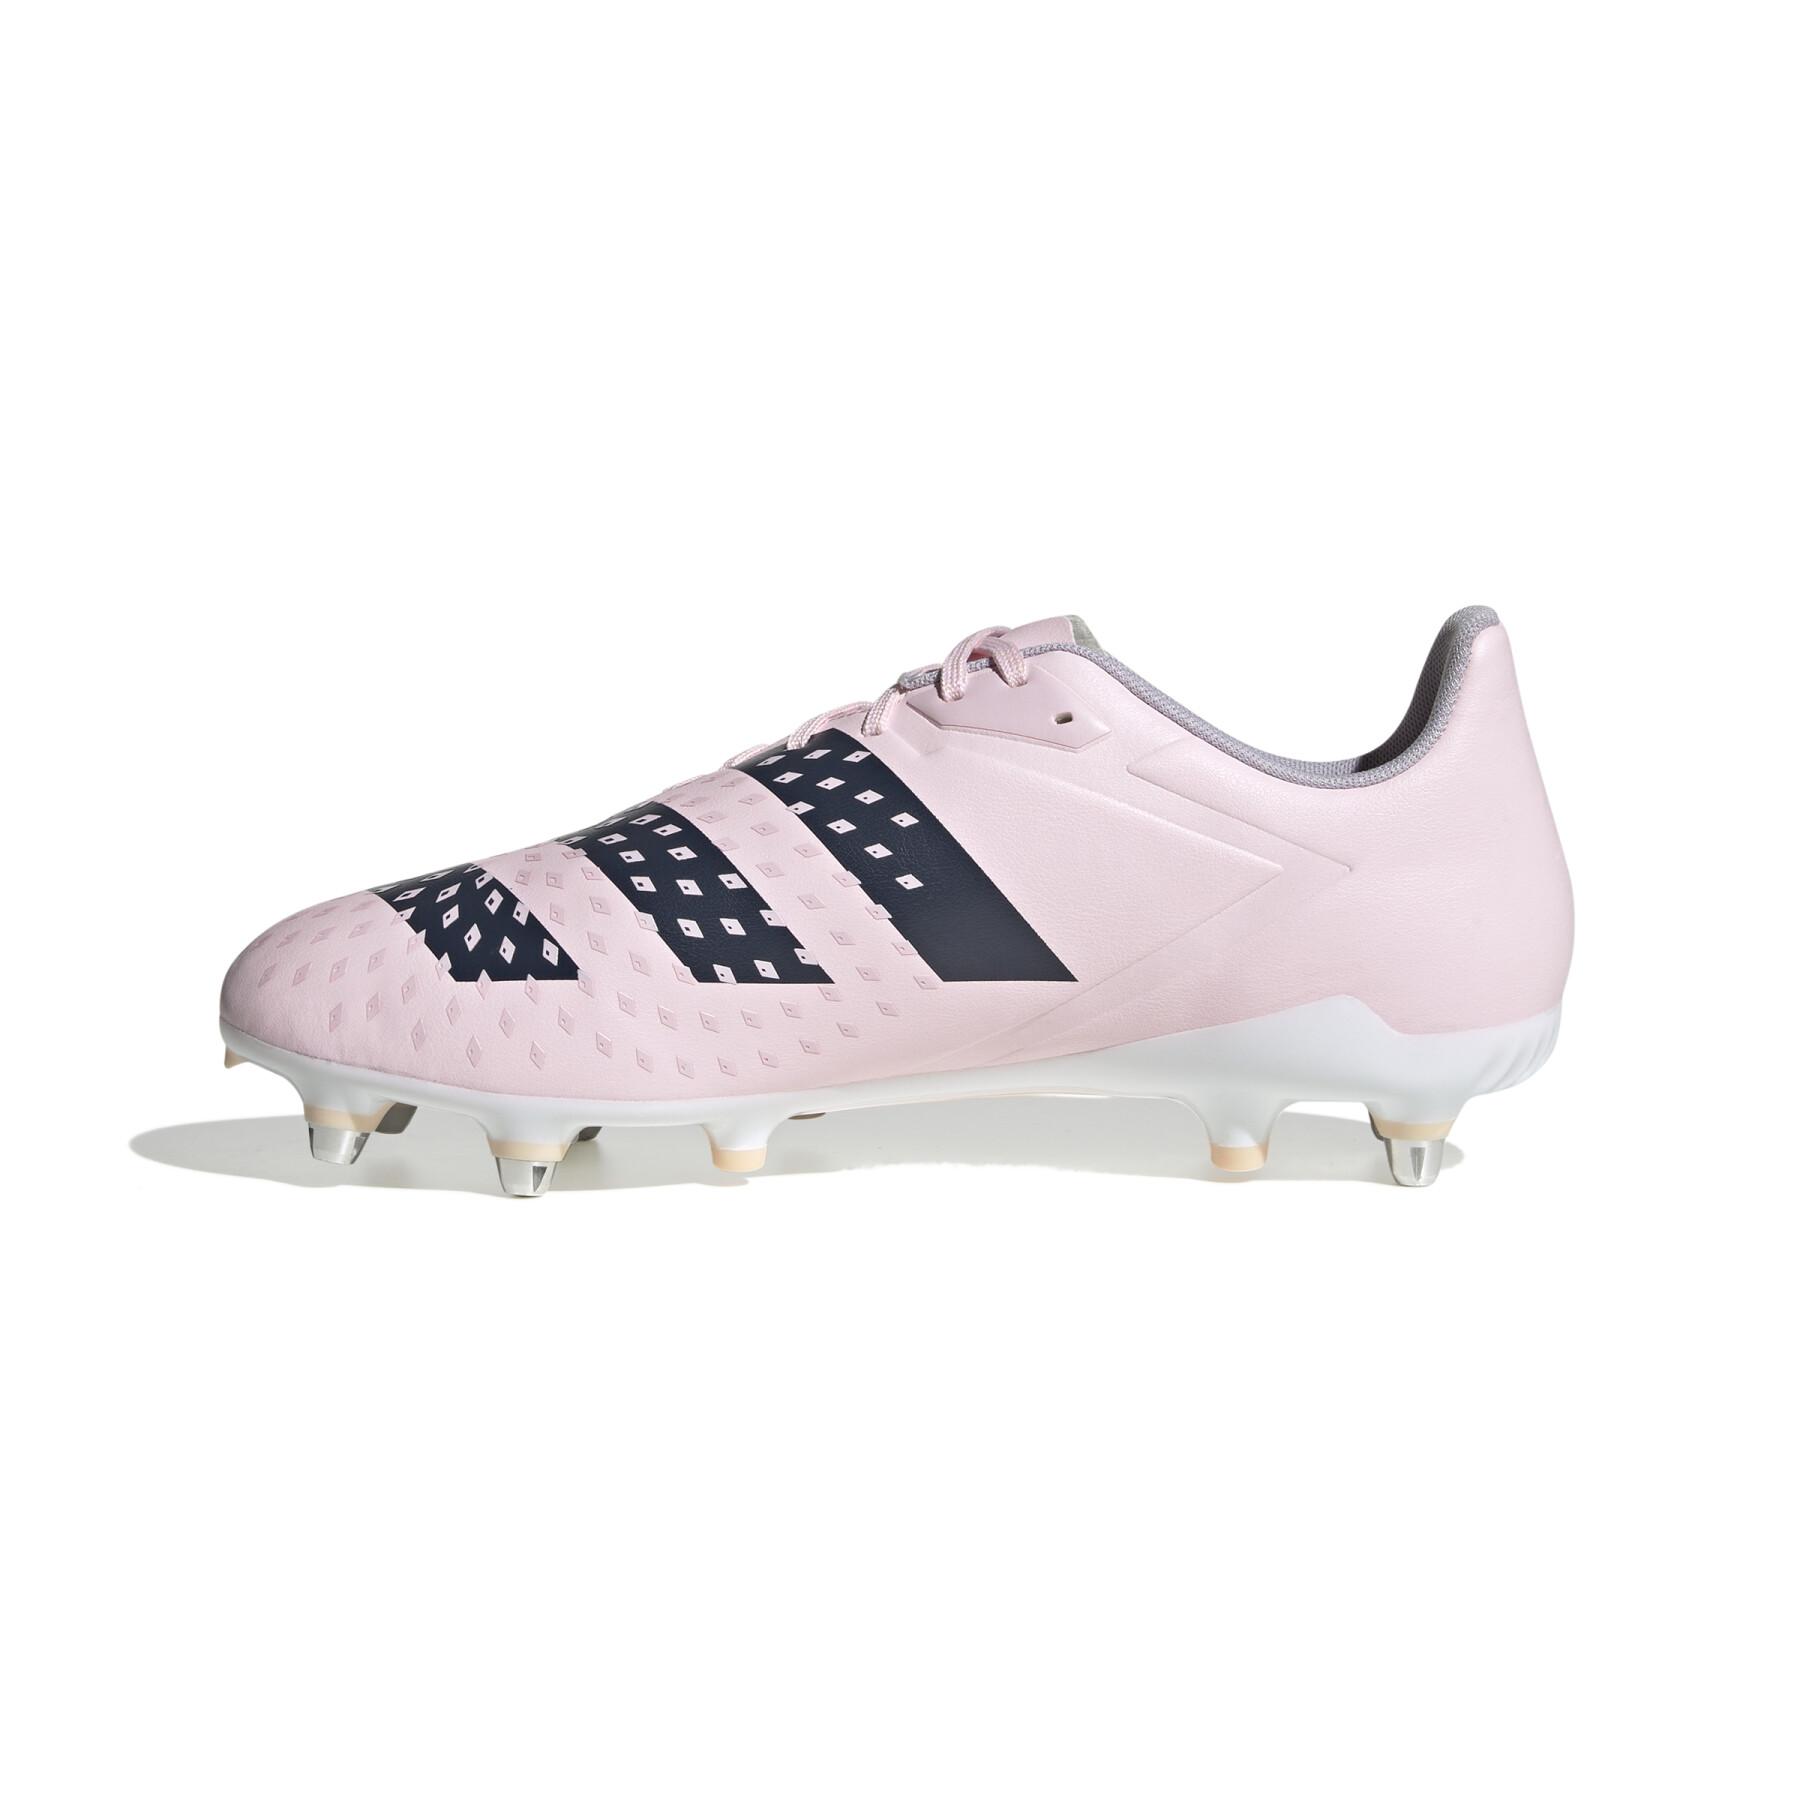 Rugby shoes adidas Malice FG